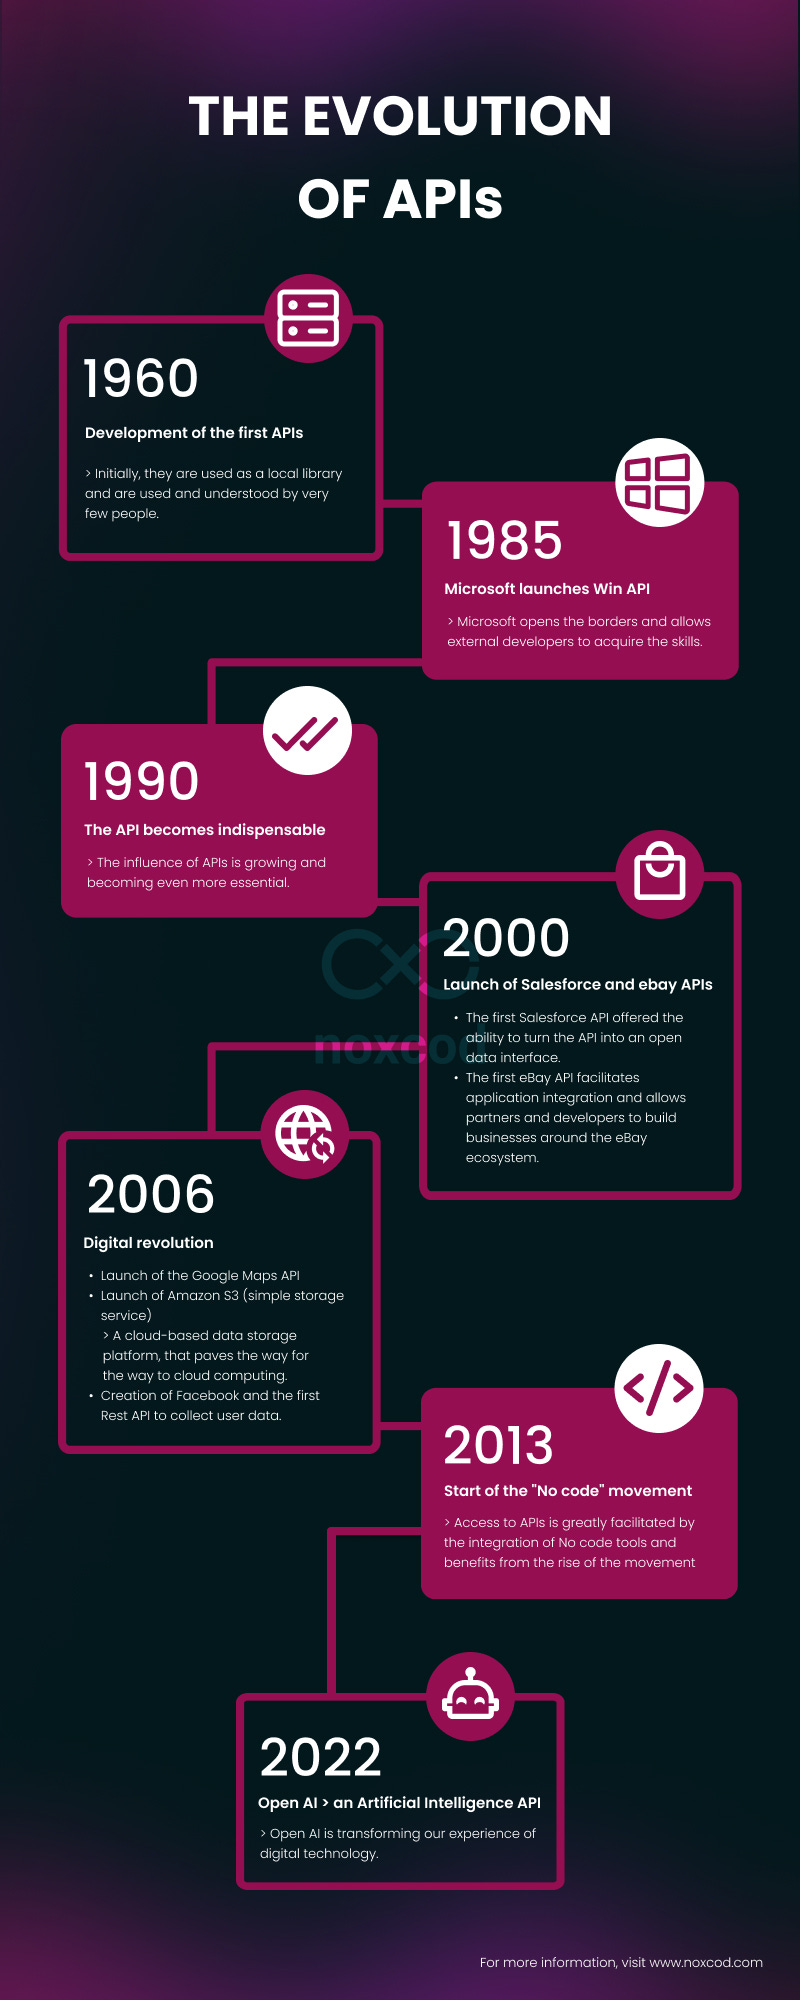 Chronological infographic that transcribes the entire history of APIs: from the first API in 1960 to today's API, AI 